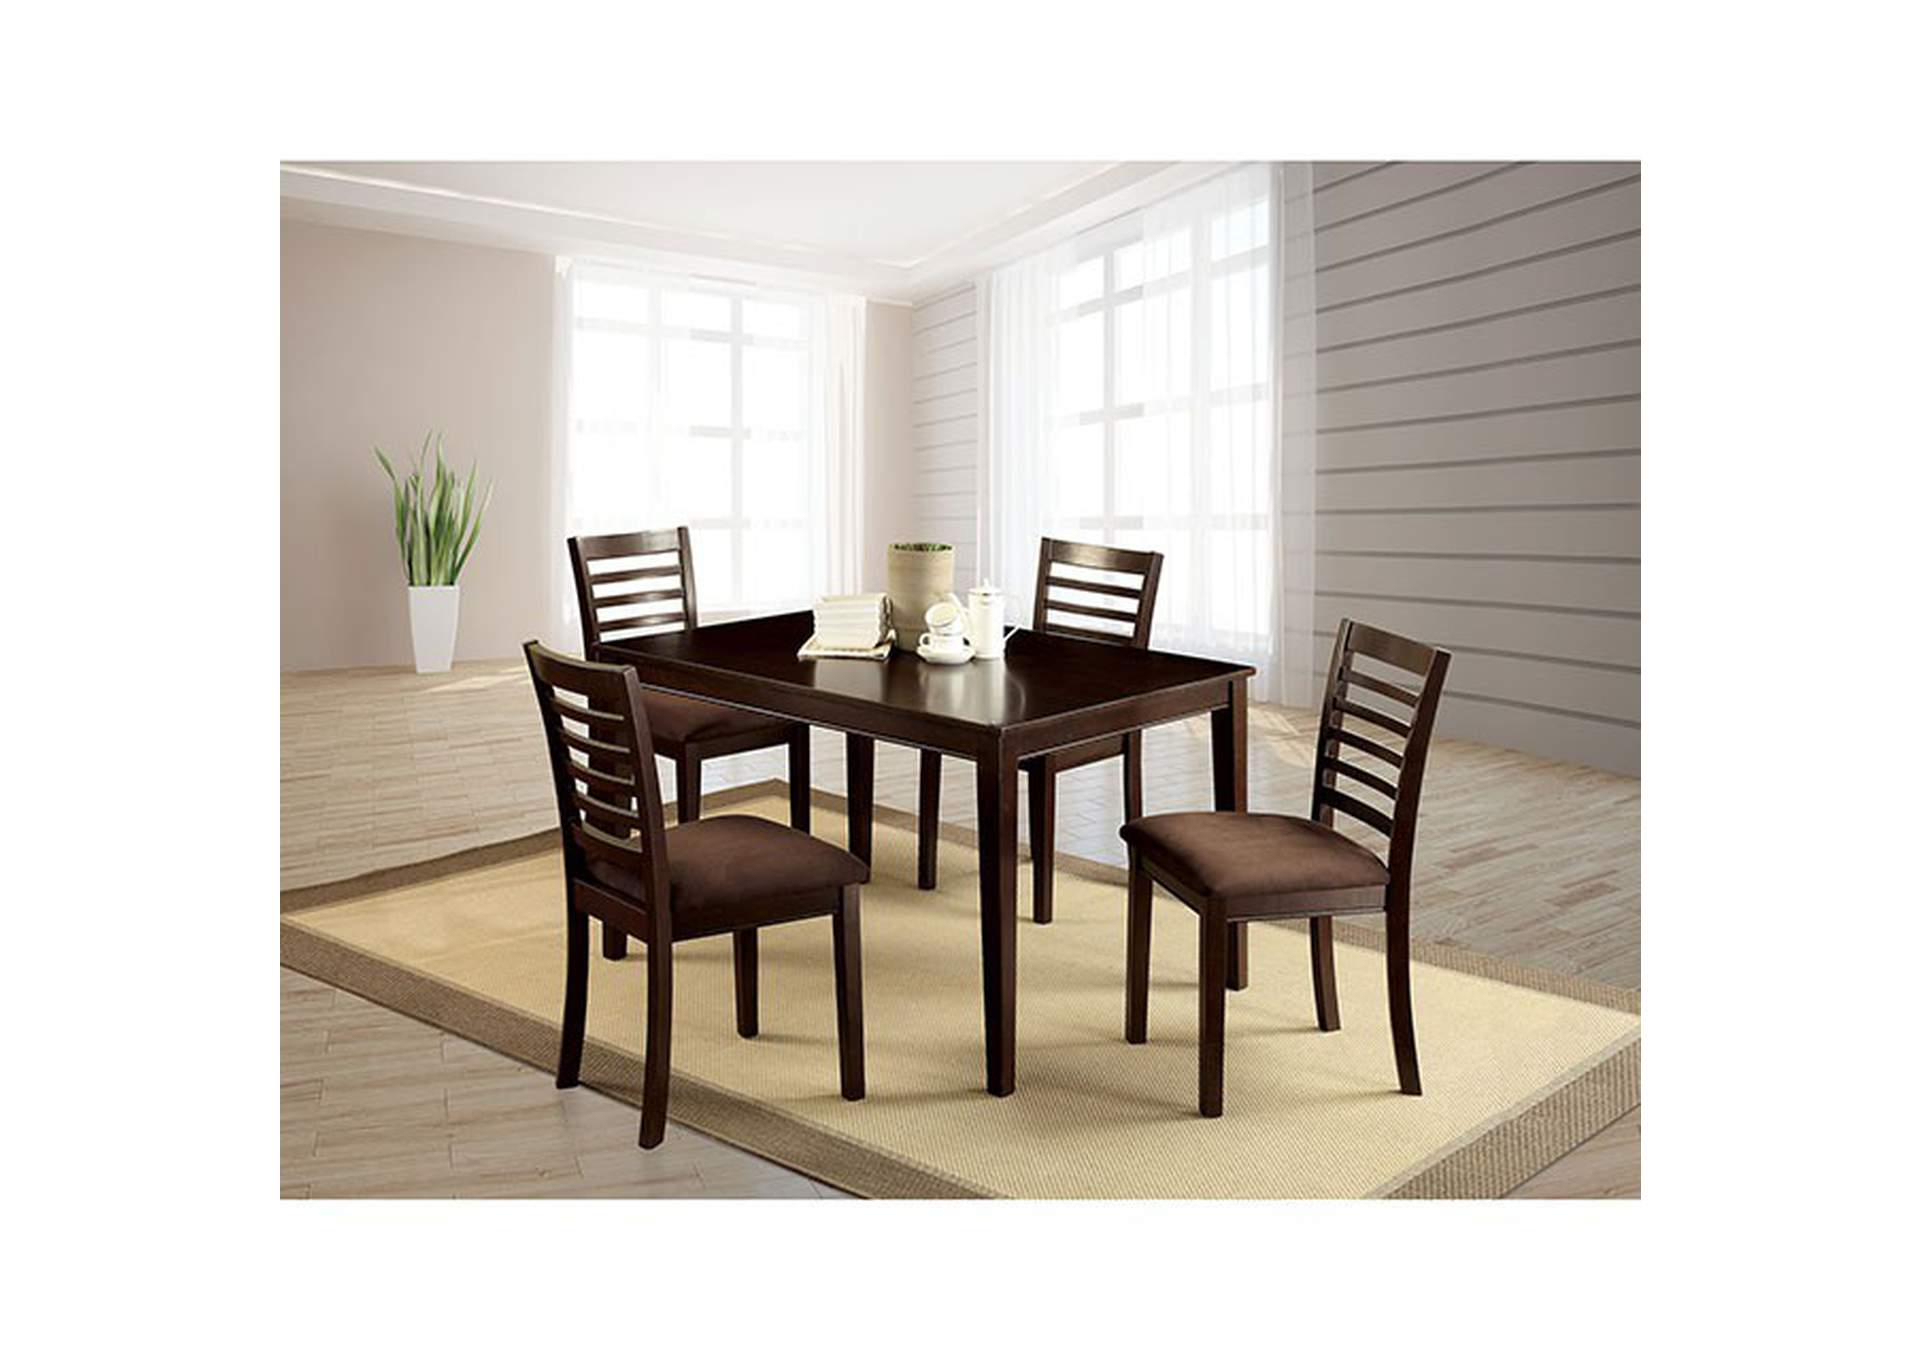 Eaton 5 Pc. Dining Table Set,Furniture of America